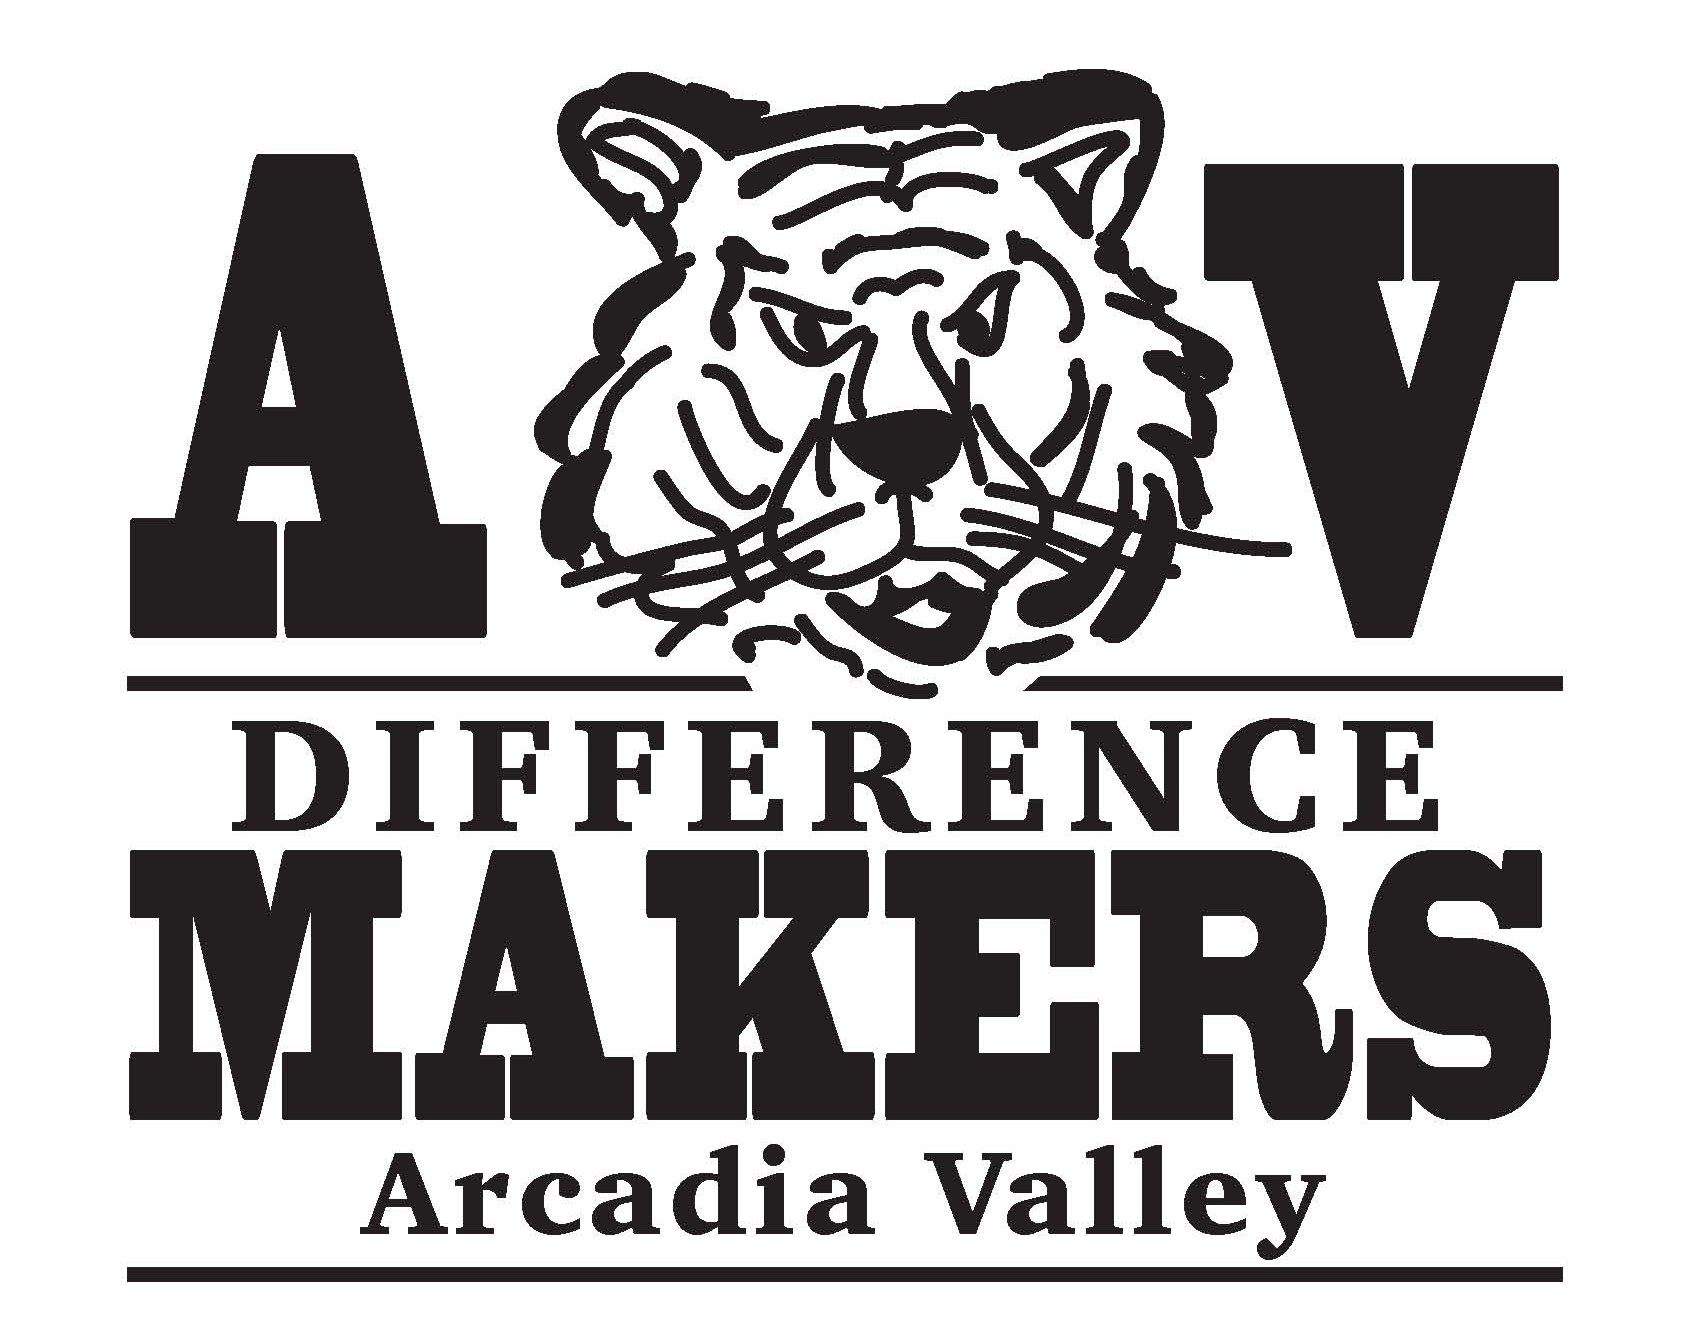 DIFFERENCE MAKERS logo